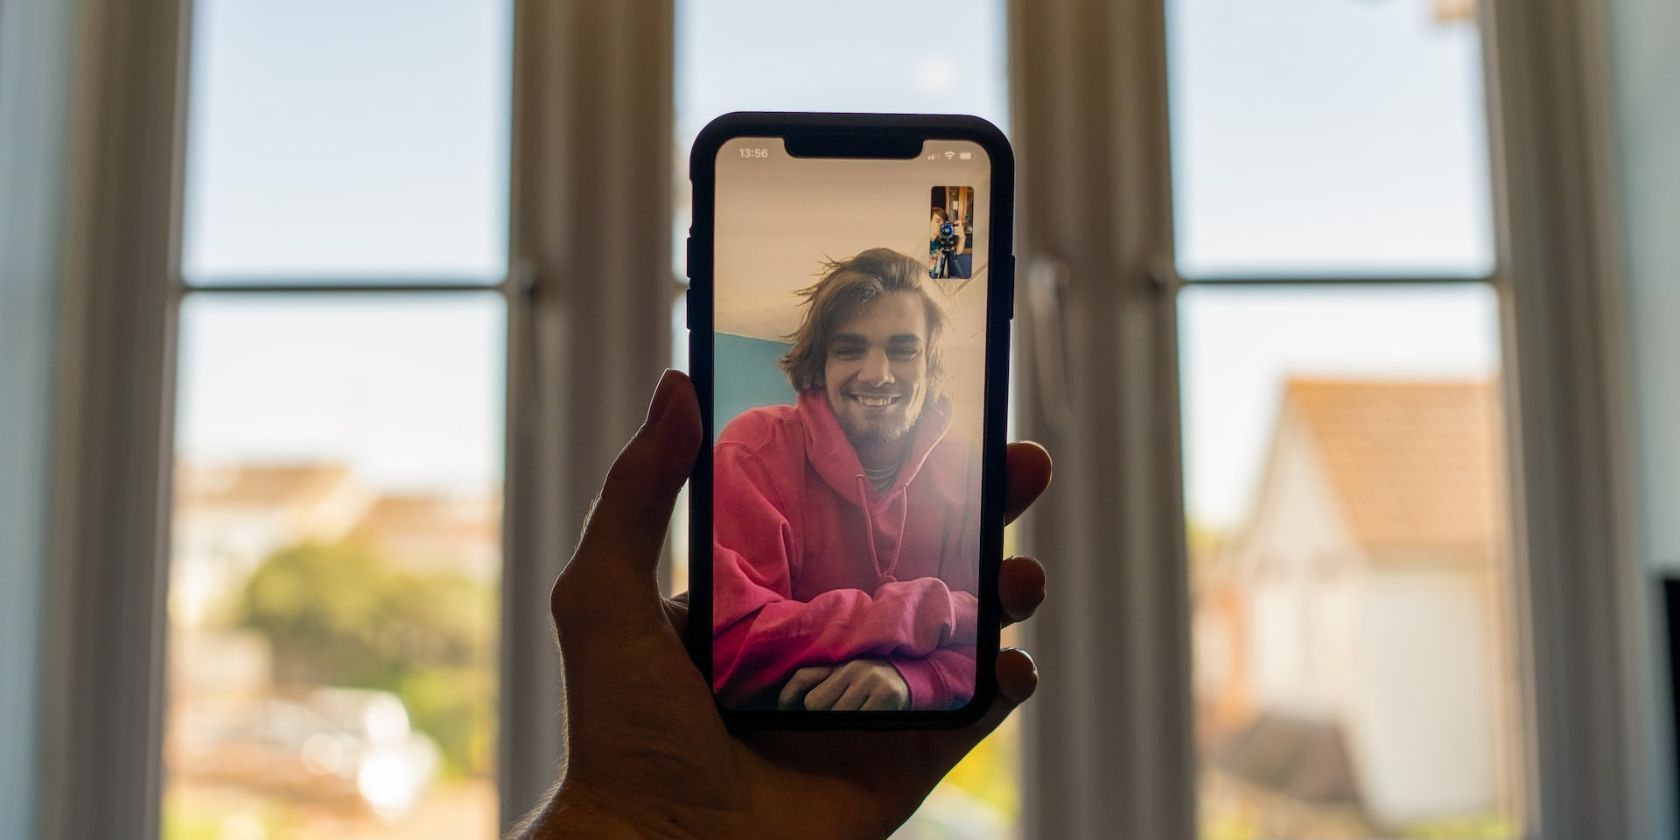 Video call on a phone